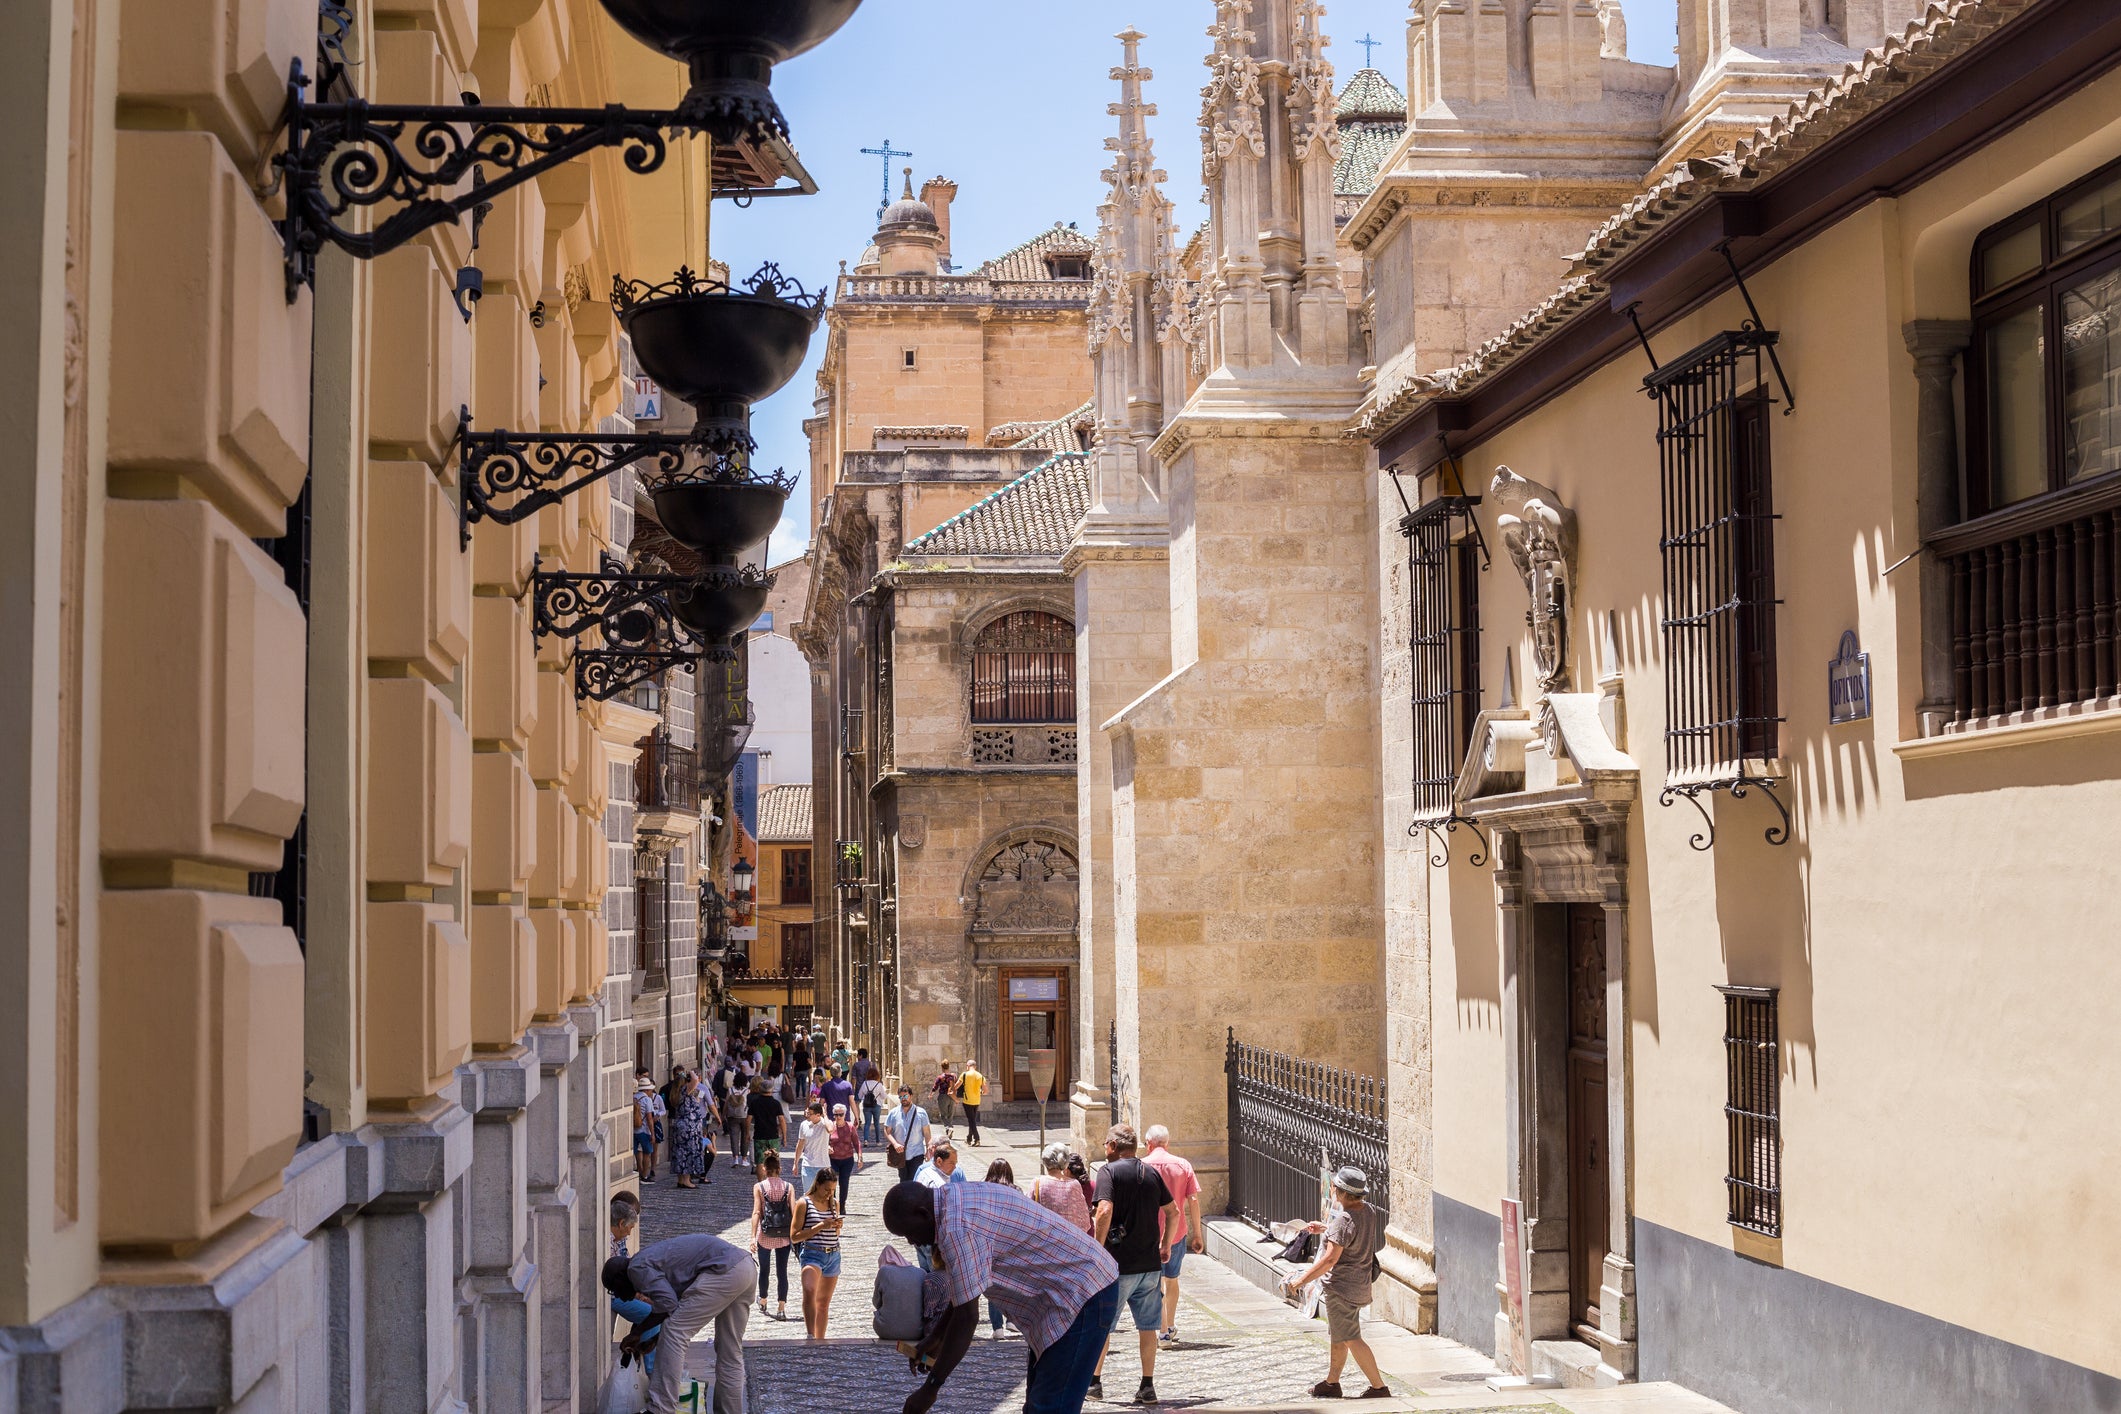 Spend time wandering Granada’s streets